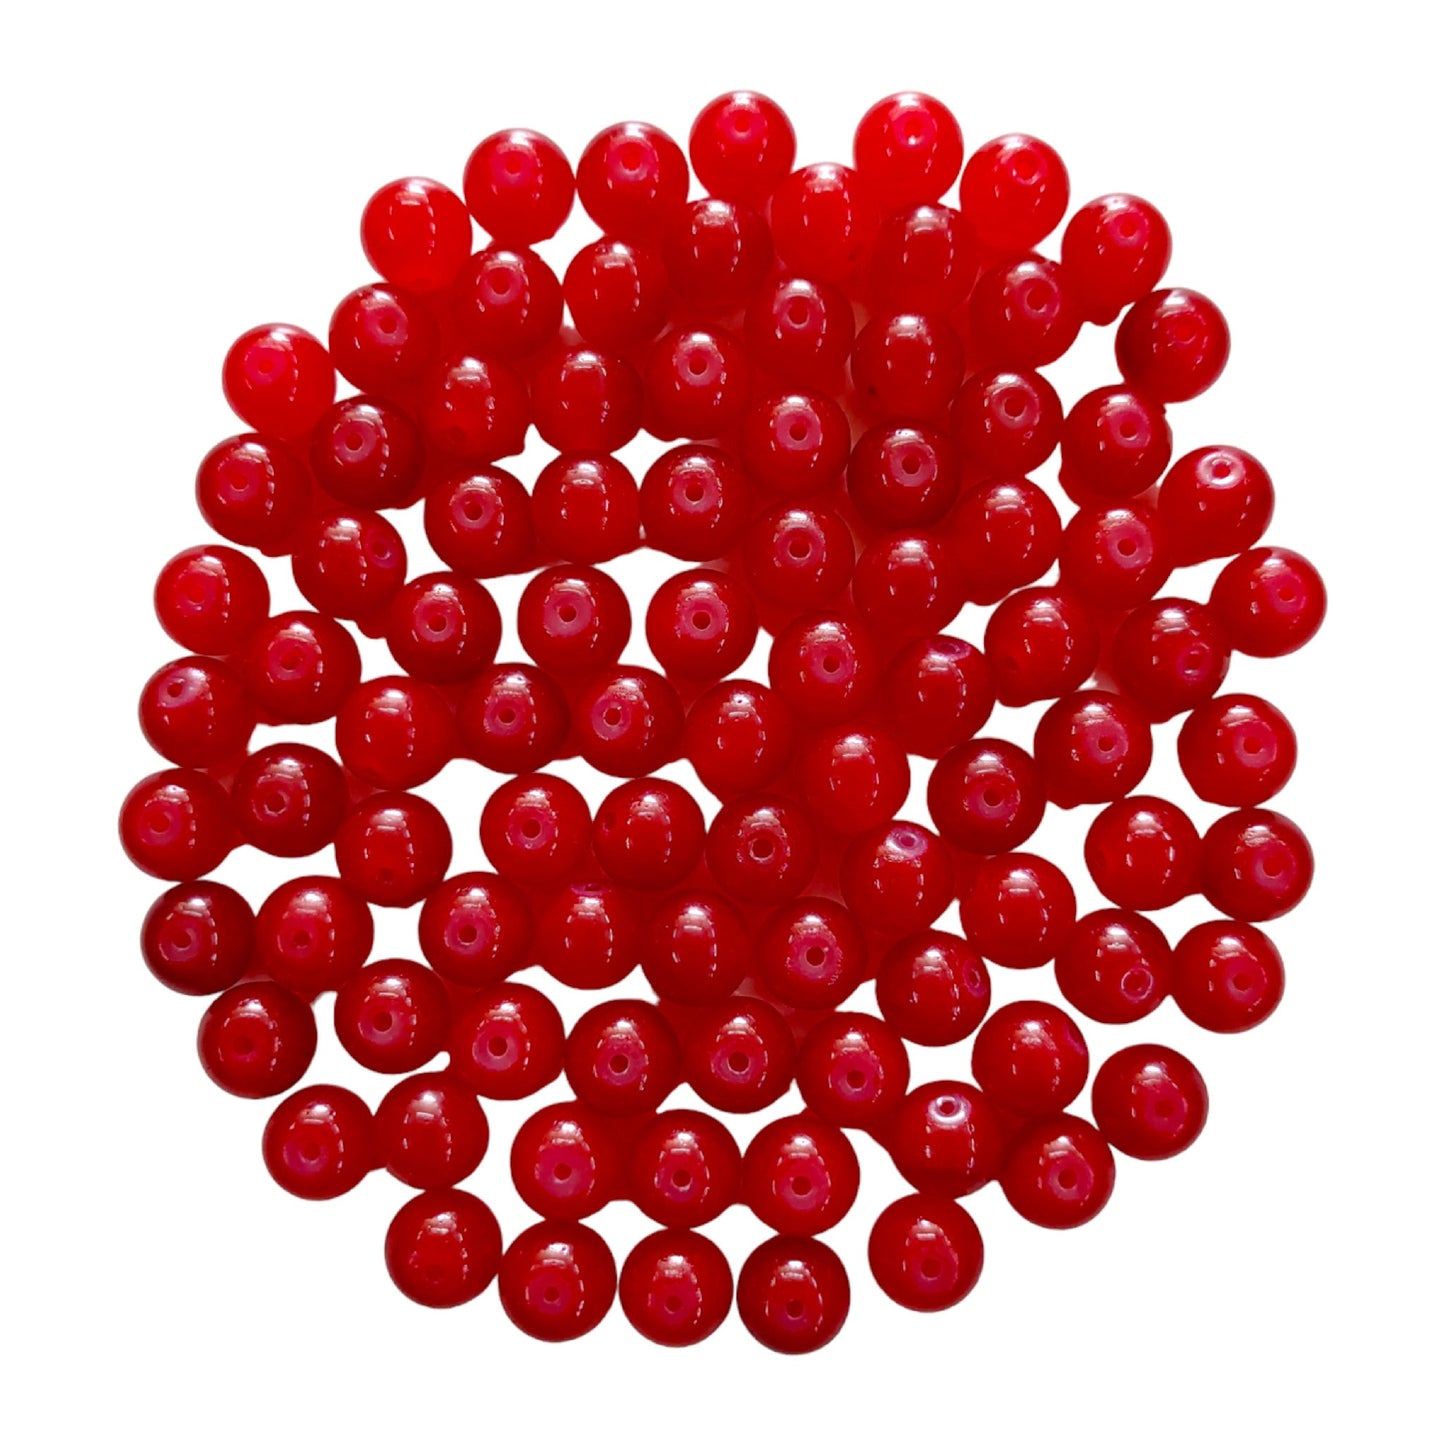 Plain round Glass Color Bead For Craft, Rakhi making or Decoration -11725